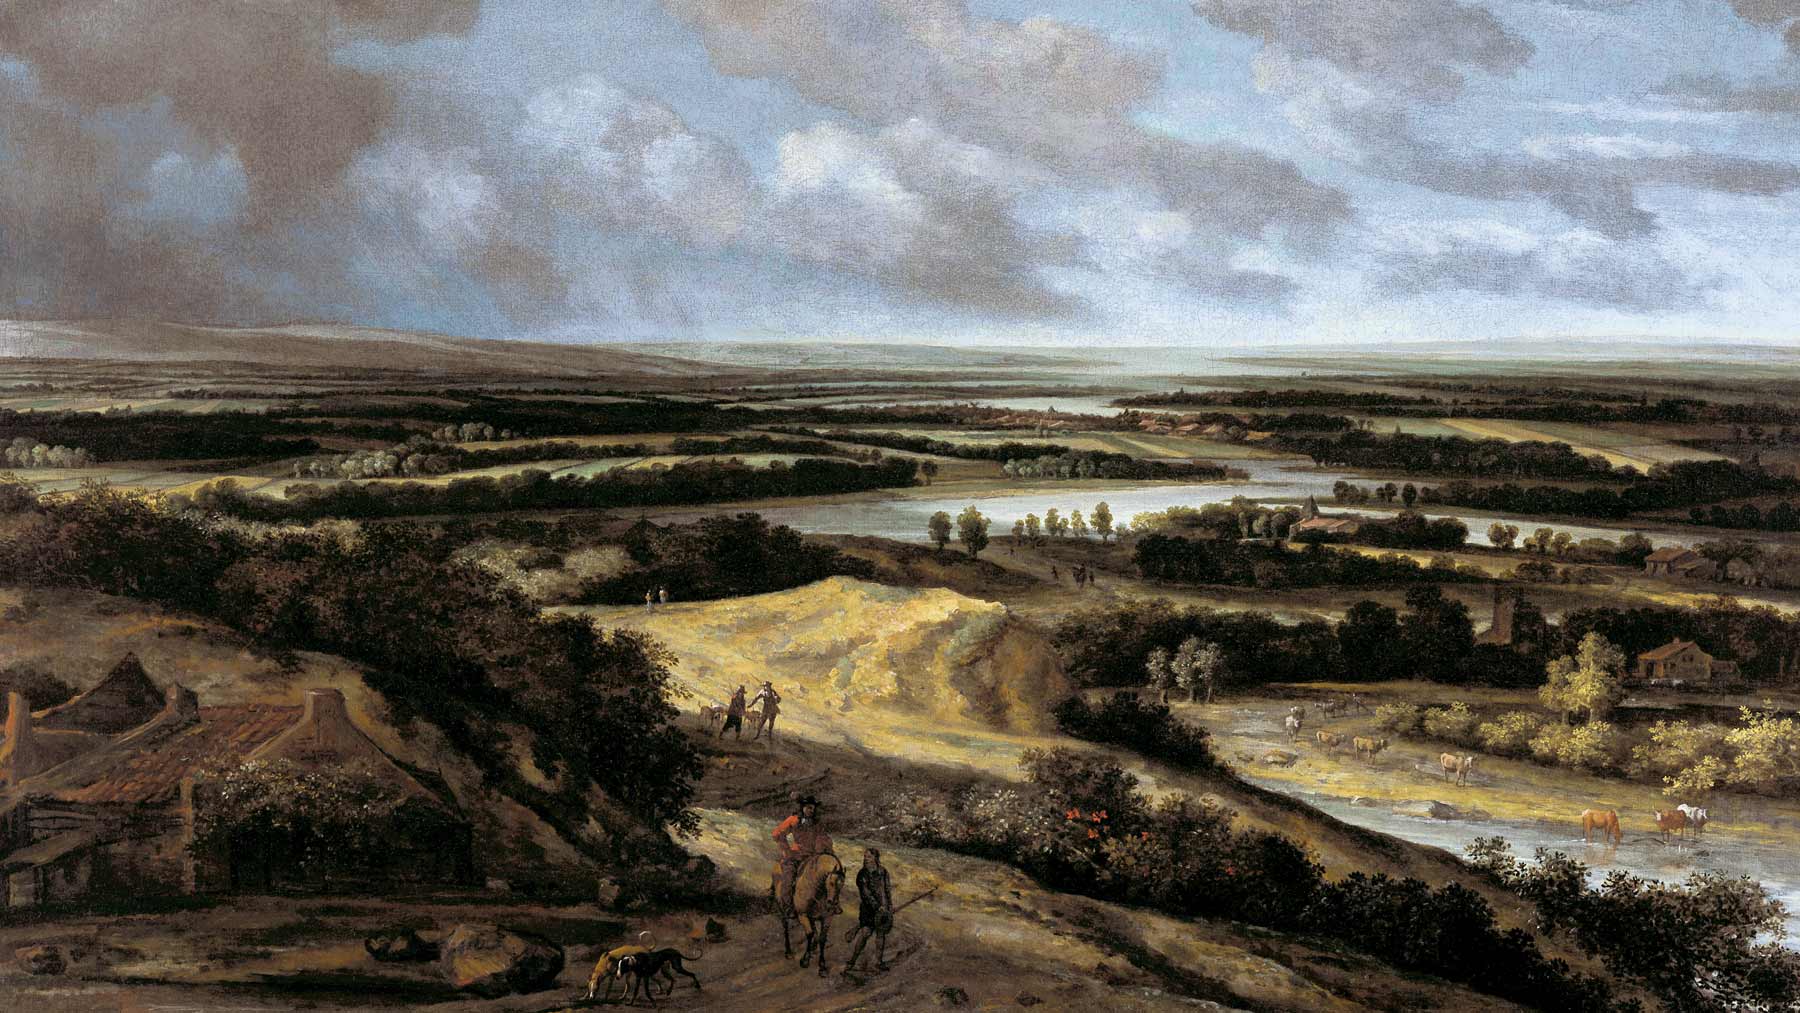 Image from Art, Life, Legacy: Northern European Paintings in the Collection of Isabel and Alfred Bader